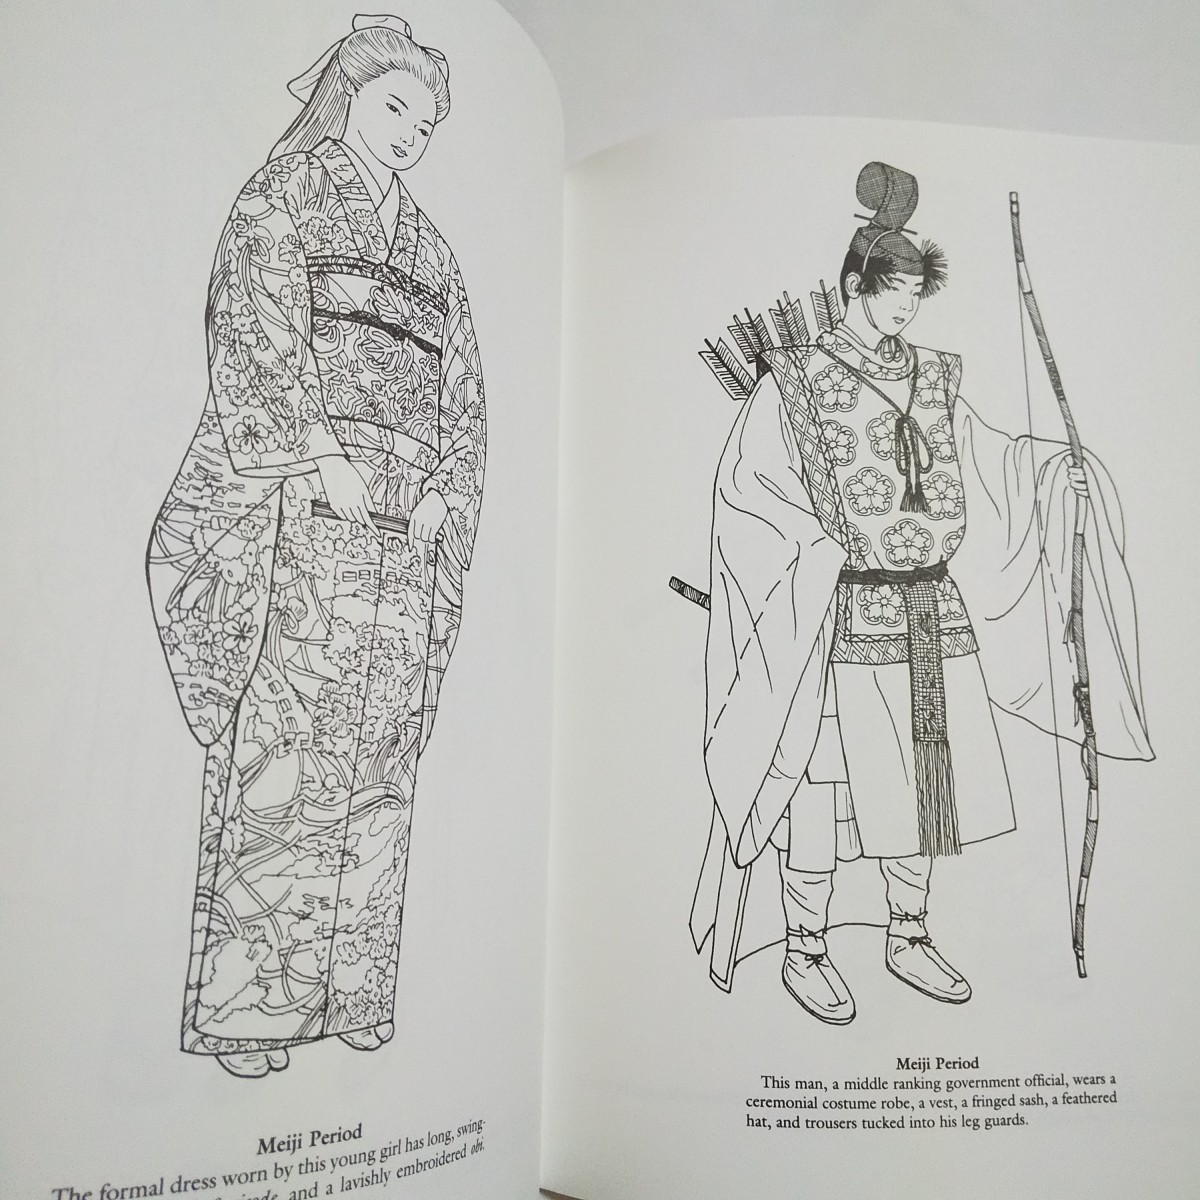 Paypayフリマ 洋書 大人 塗り絵 ぬり絵 Dover Coloring Book Japanese Fashion 侍 日本 和 和風 着物